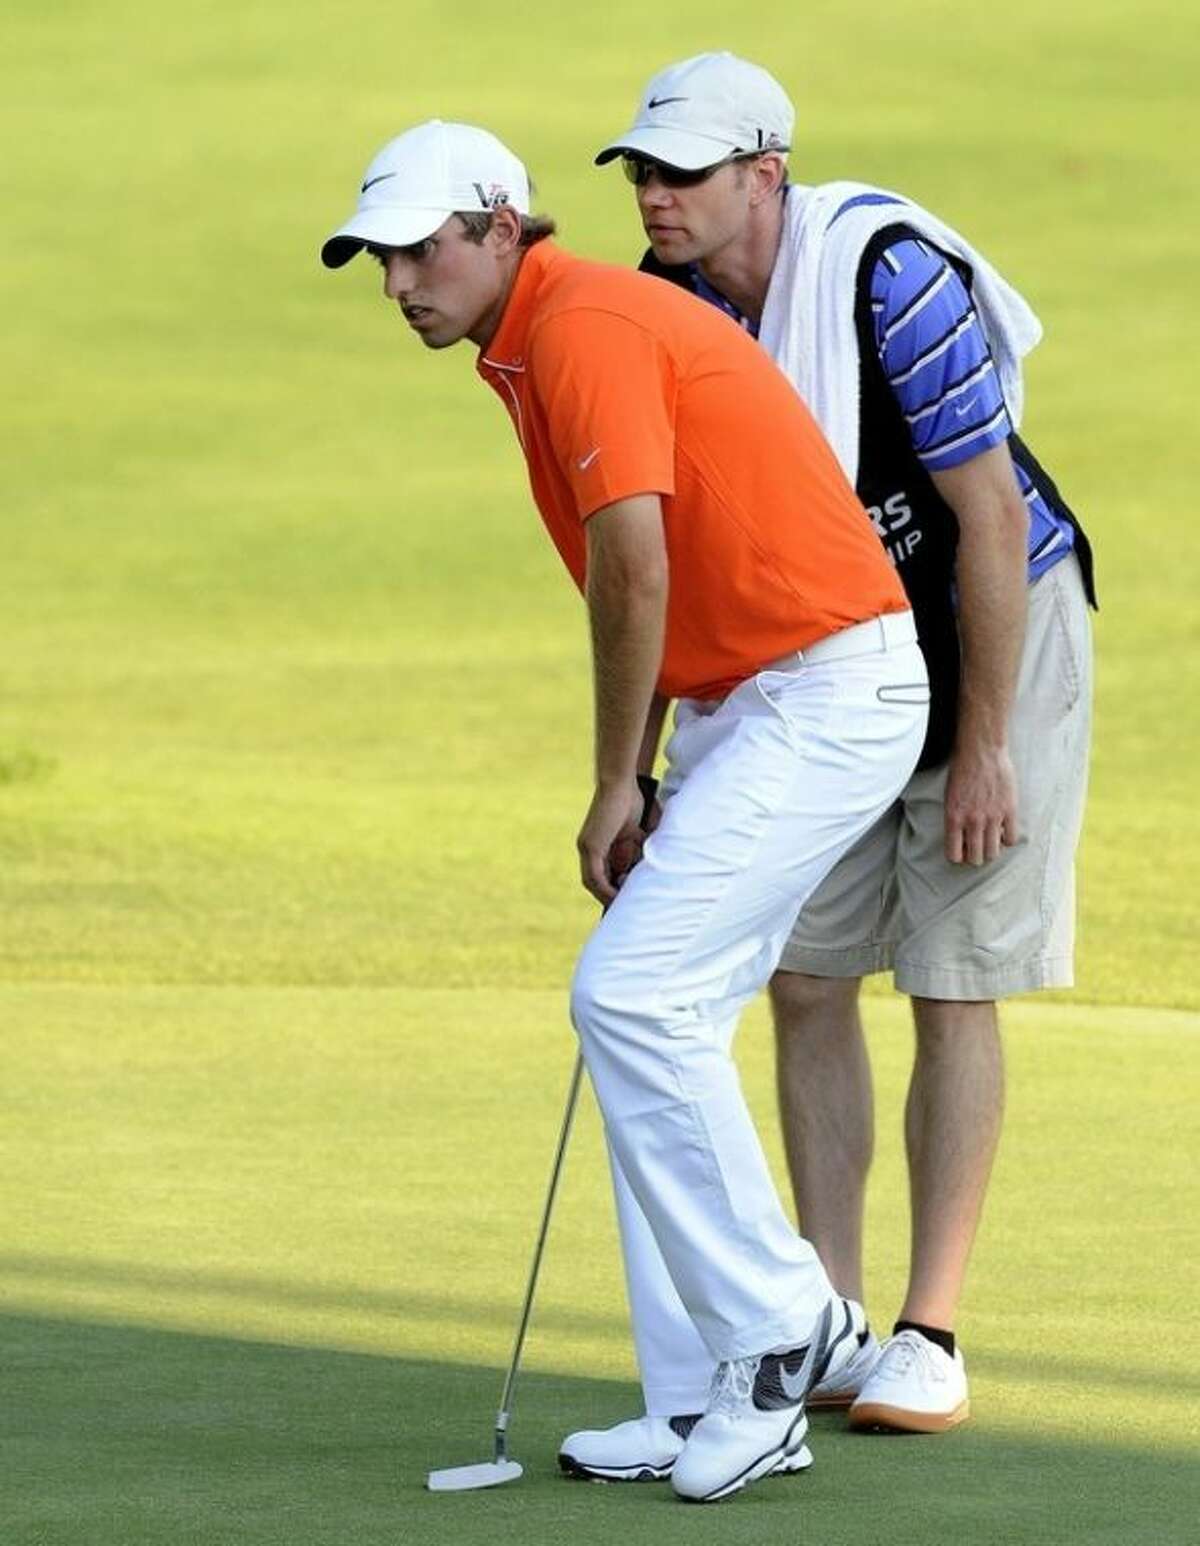 Chris Williams, left, reads a putt with his caddie on the 18th hole of his first professional tournament during the first round of the Travelers Championship golf tournament in Cromwell, Conn., Thursday, June 20, 2013. (AP Photo/Fred Beckham)